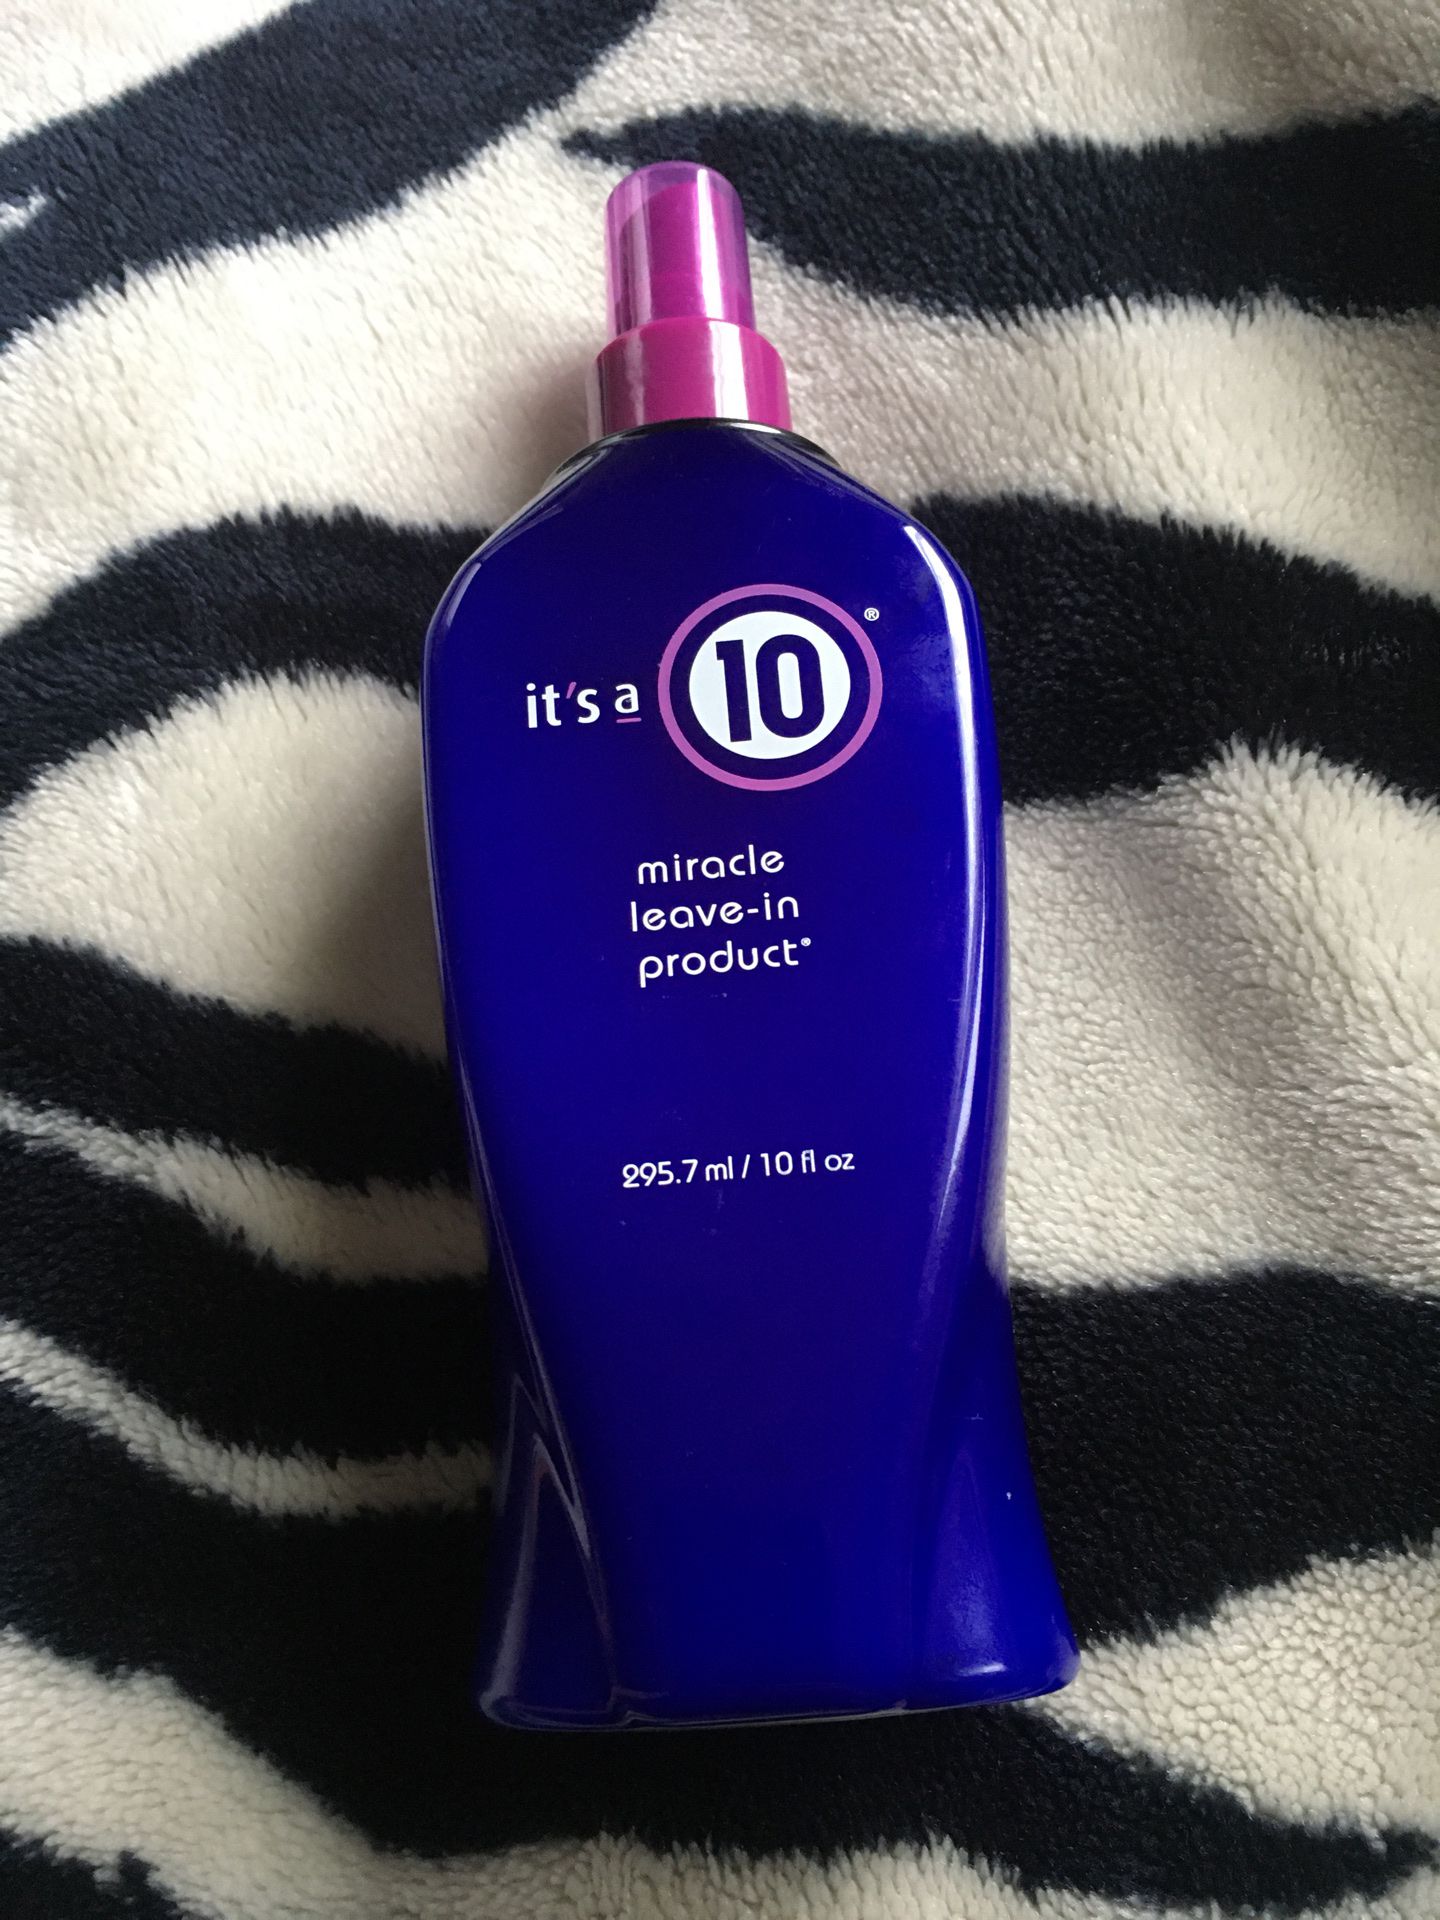 It’s a 10 conditioner